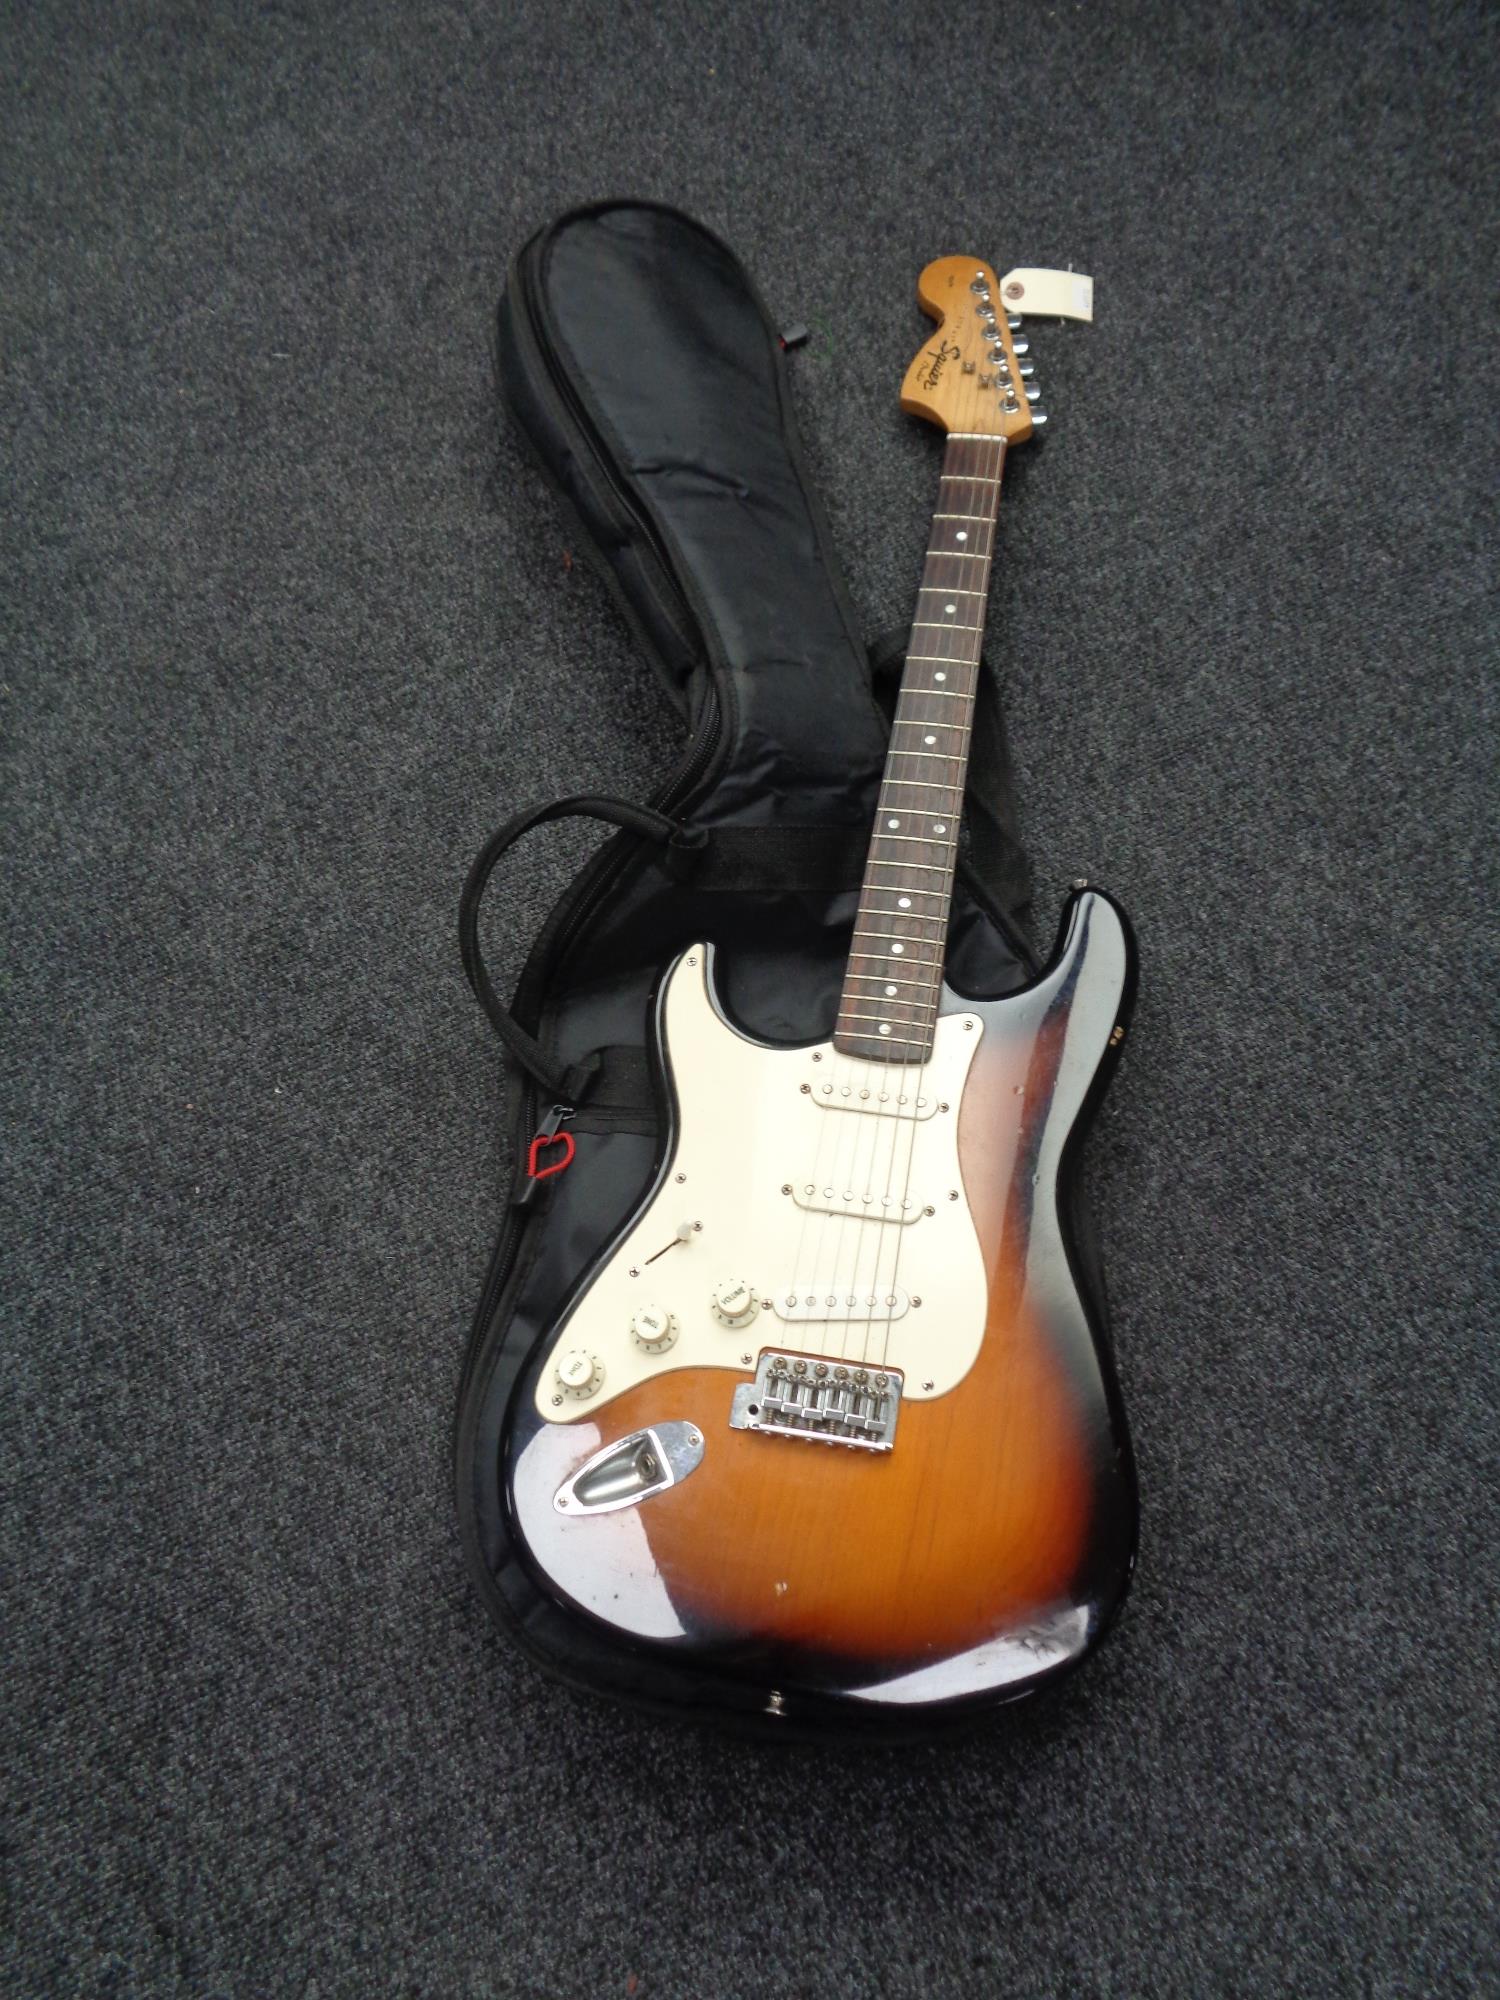 A Fender Squire Stratocaster left-handed electric guitar in carry bag